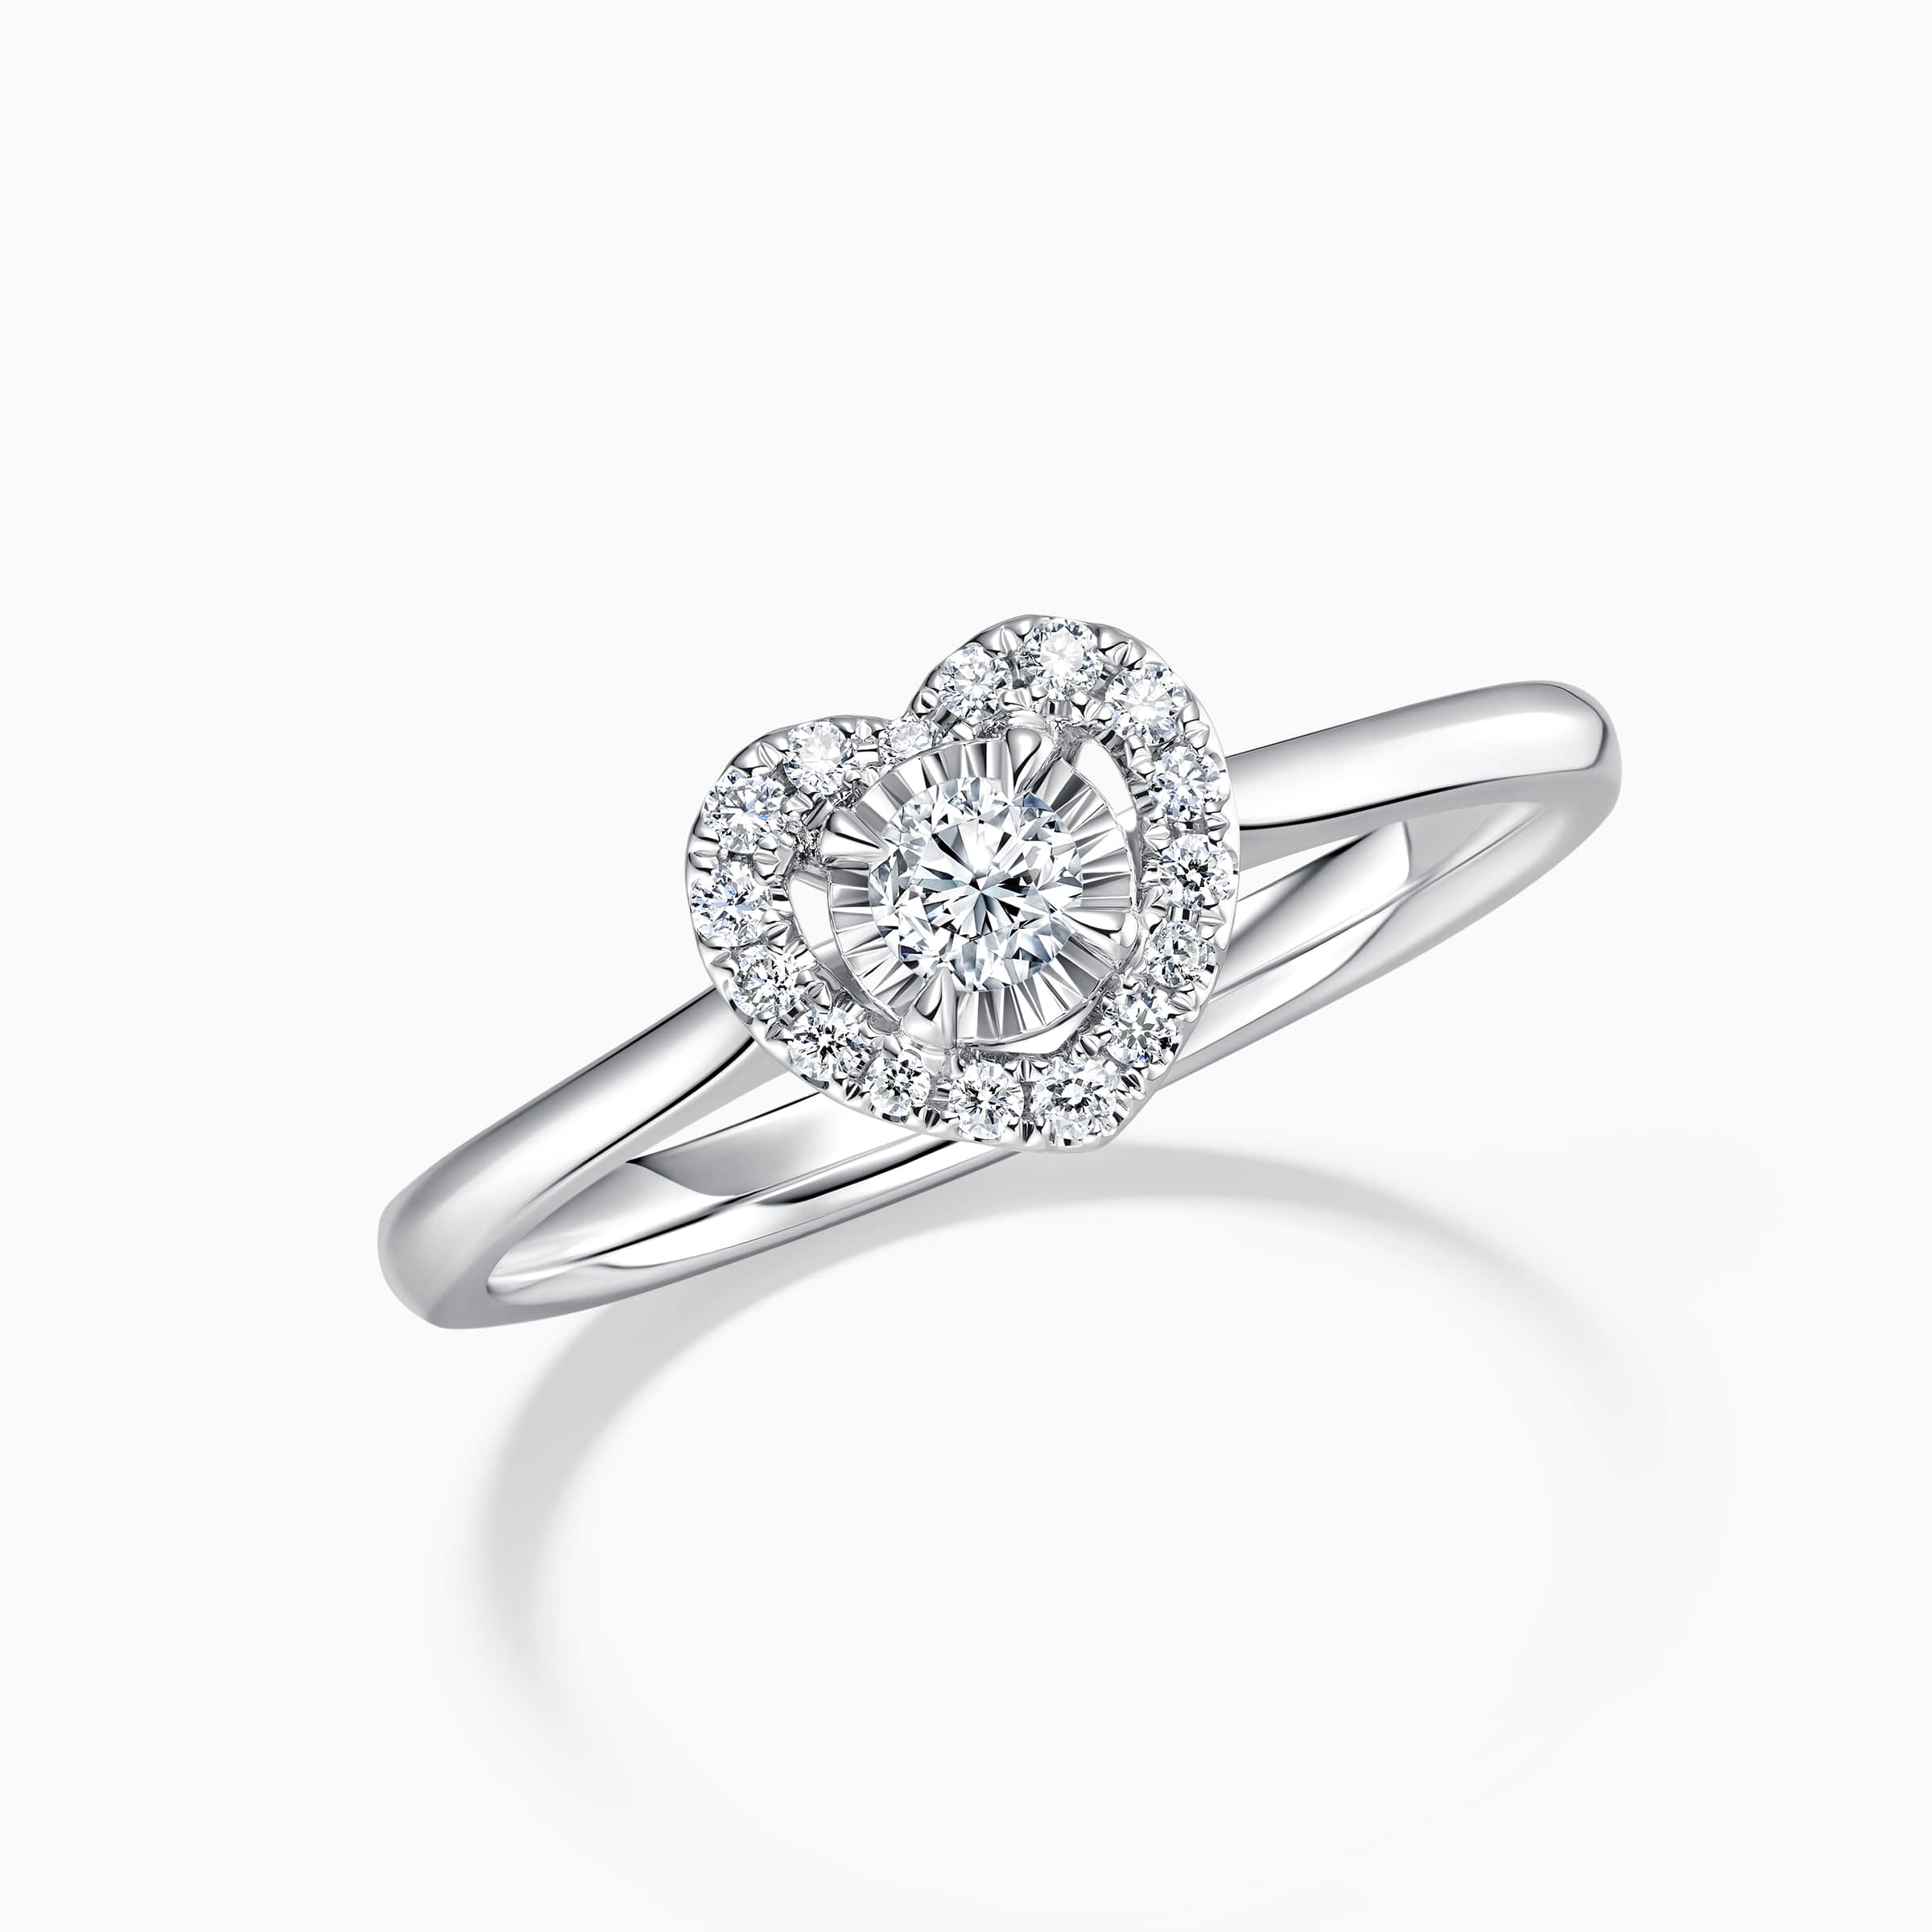 darry ring heart halo engagement ring angle view